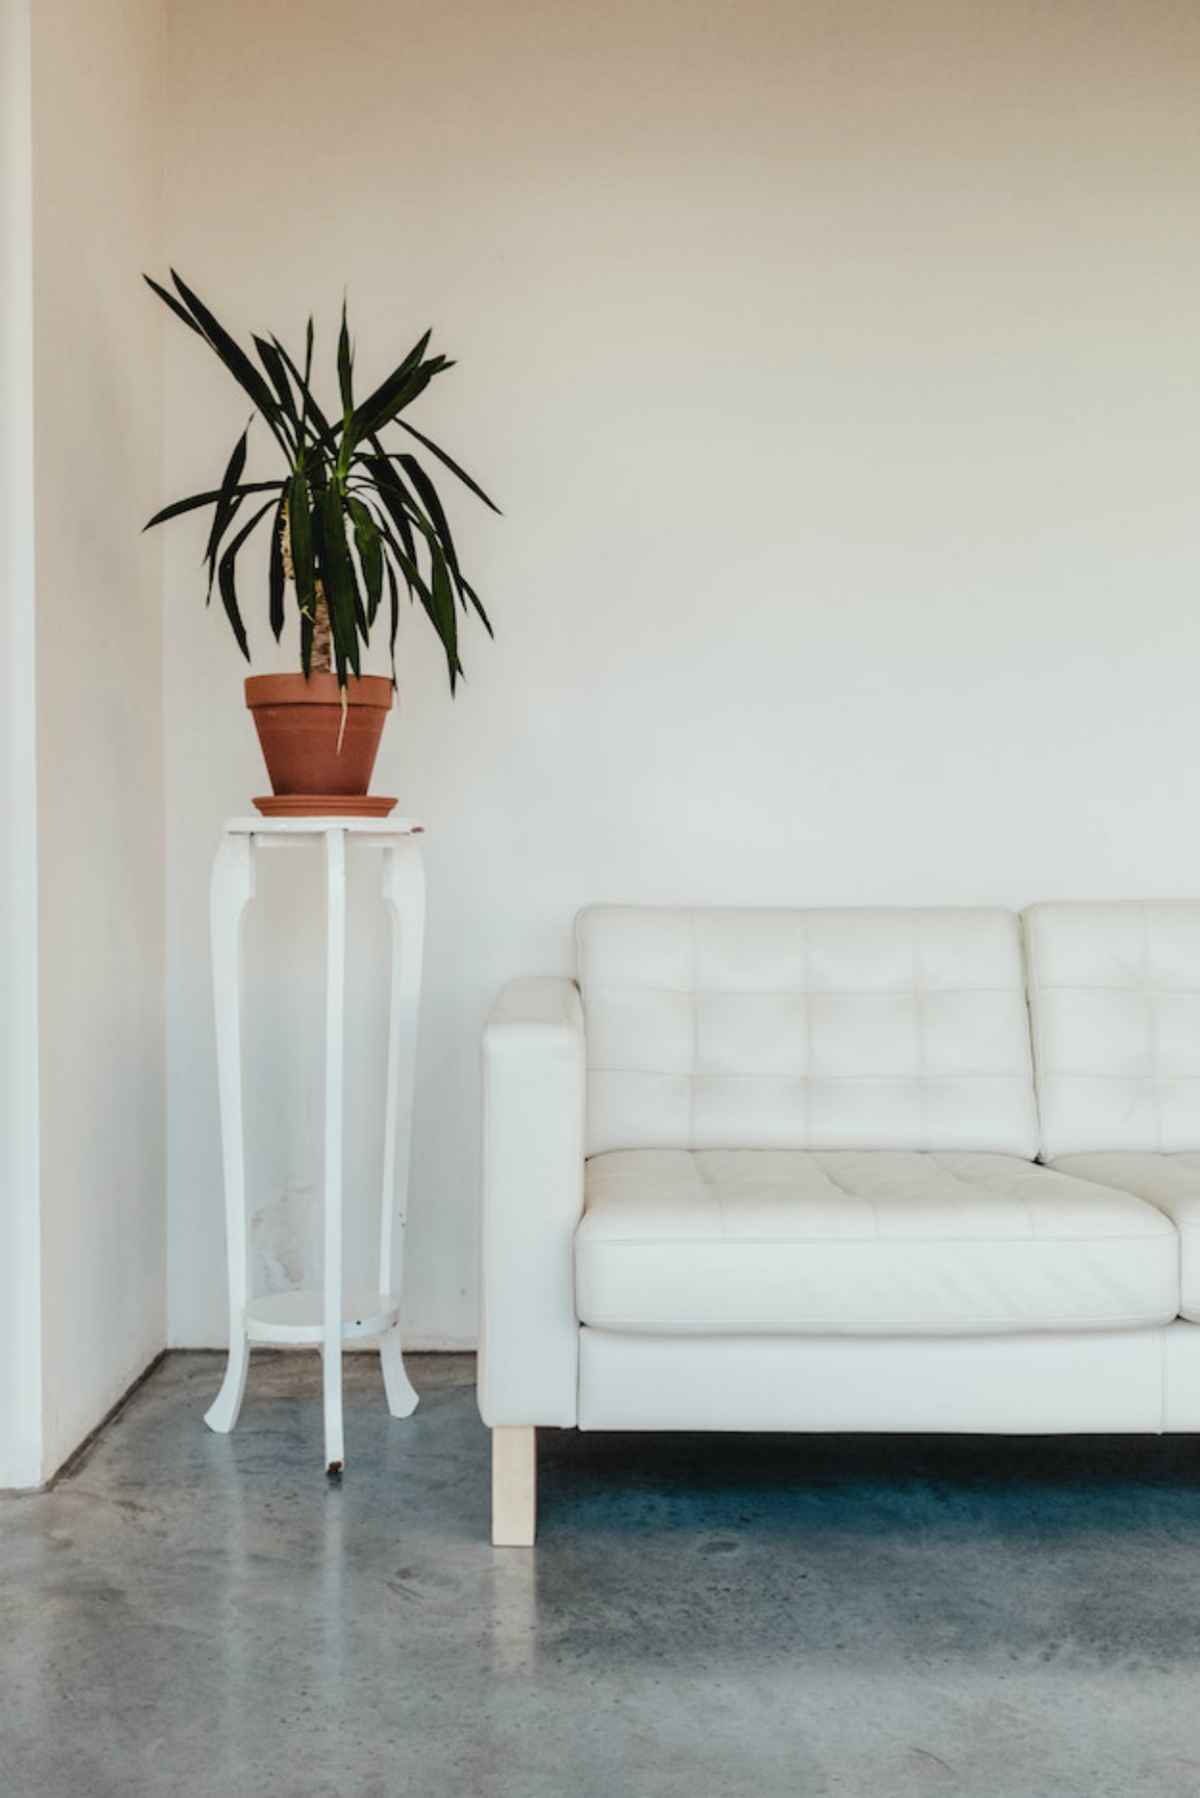 houseplant next to sofa | Easy Home Improvement Projects: Small Budget, Big Impact Upgrades